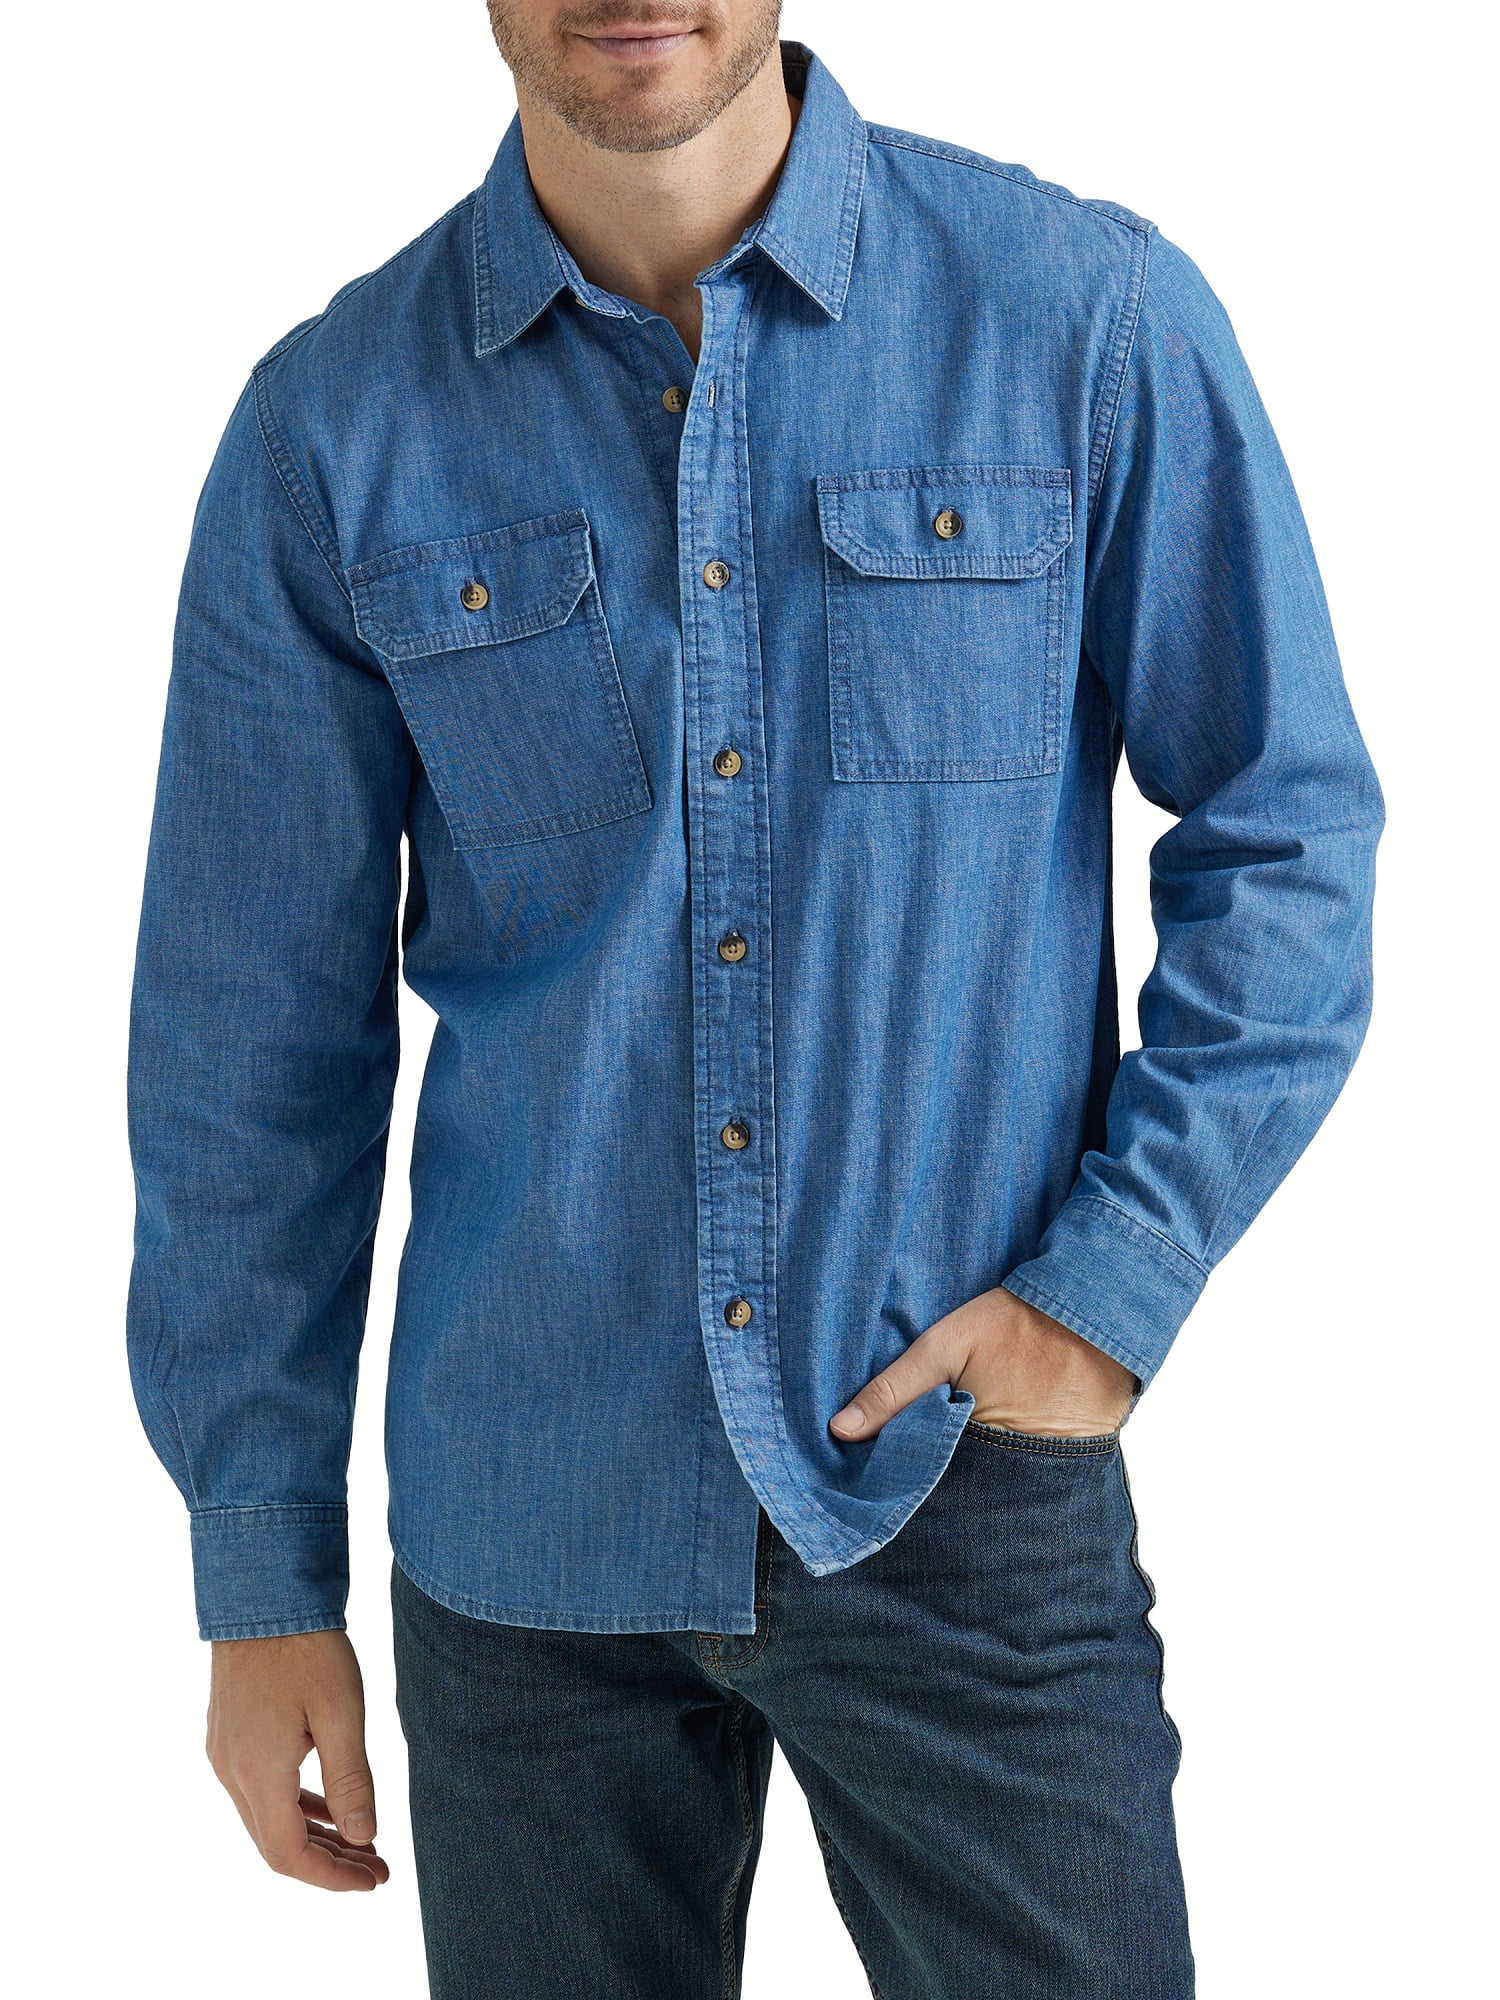 Wrangler® Men's and Big Men's Relaxed Fit Long Sleeve Woven Shirt